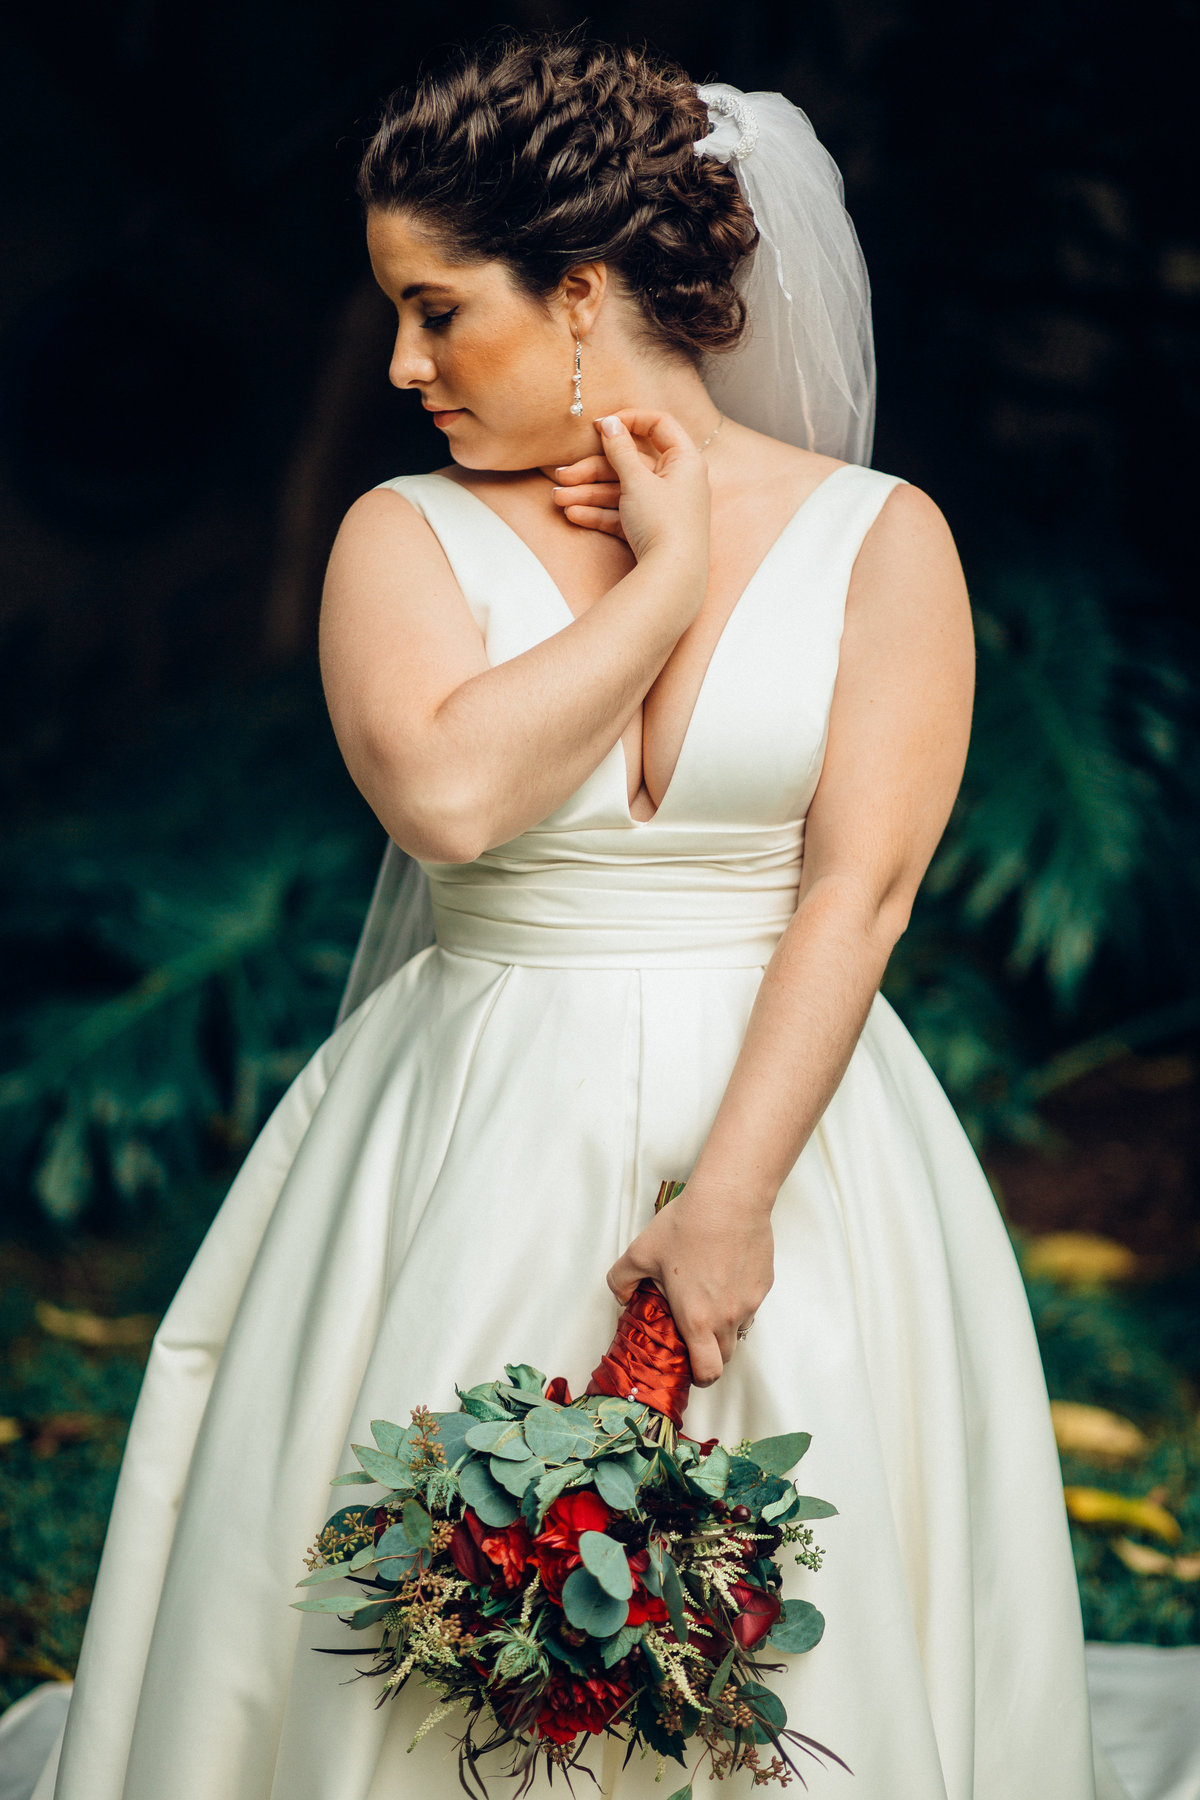 Bride With Flowers Photography